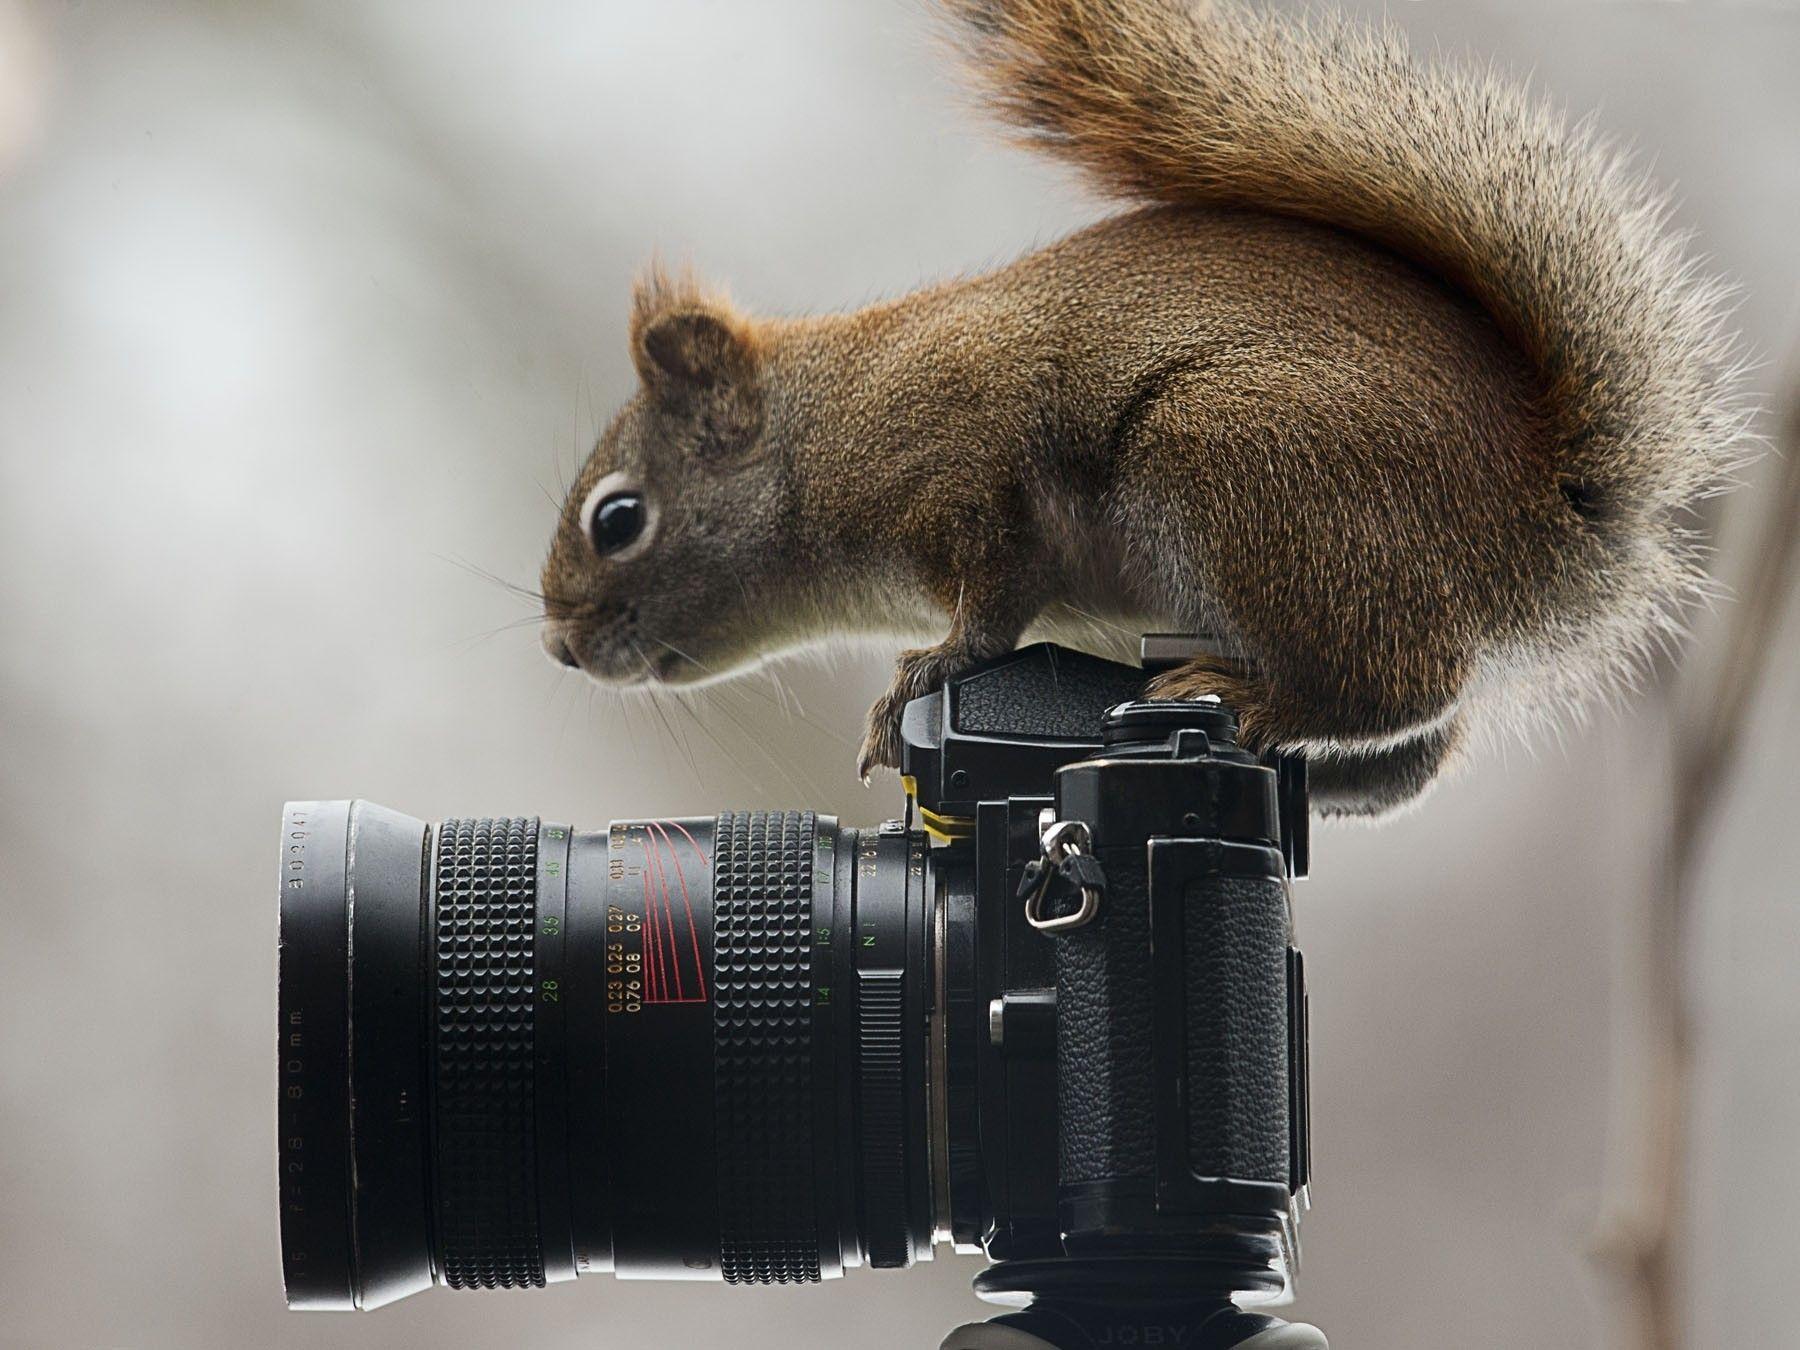 Download HD nature, Photography, Squirrel, Camera, Animals, Moss